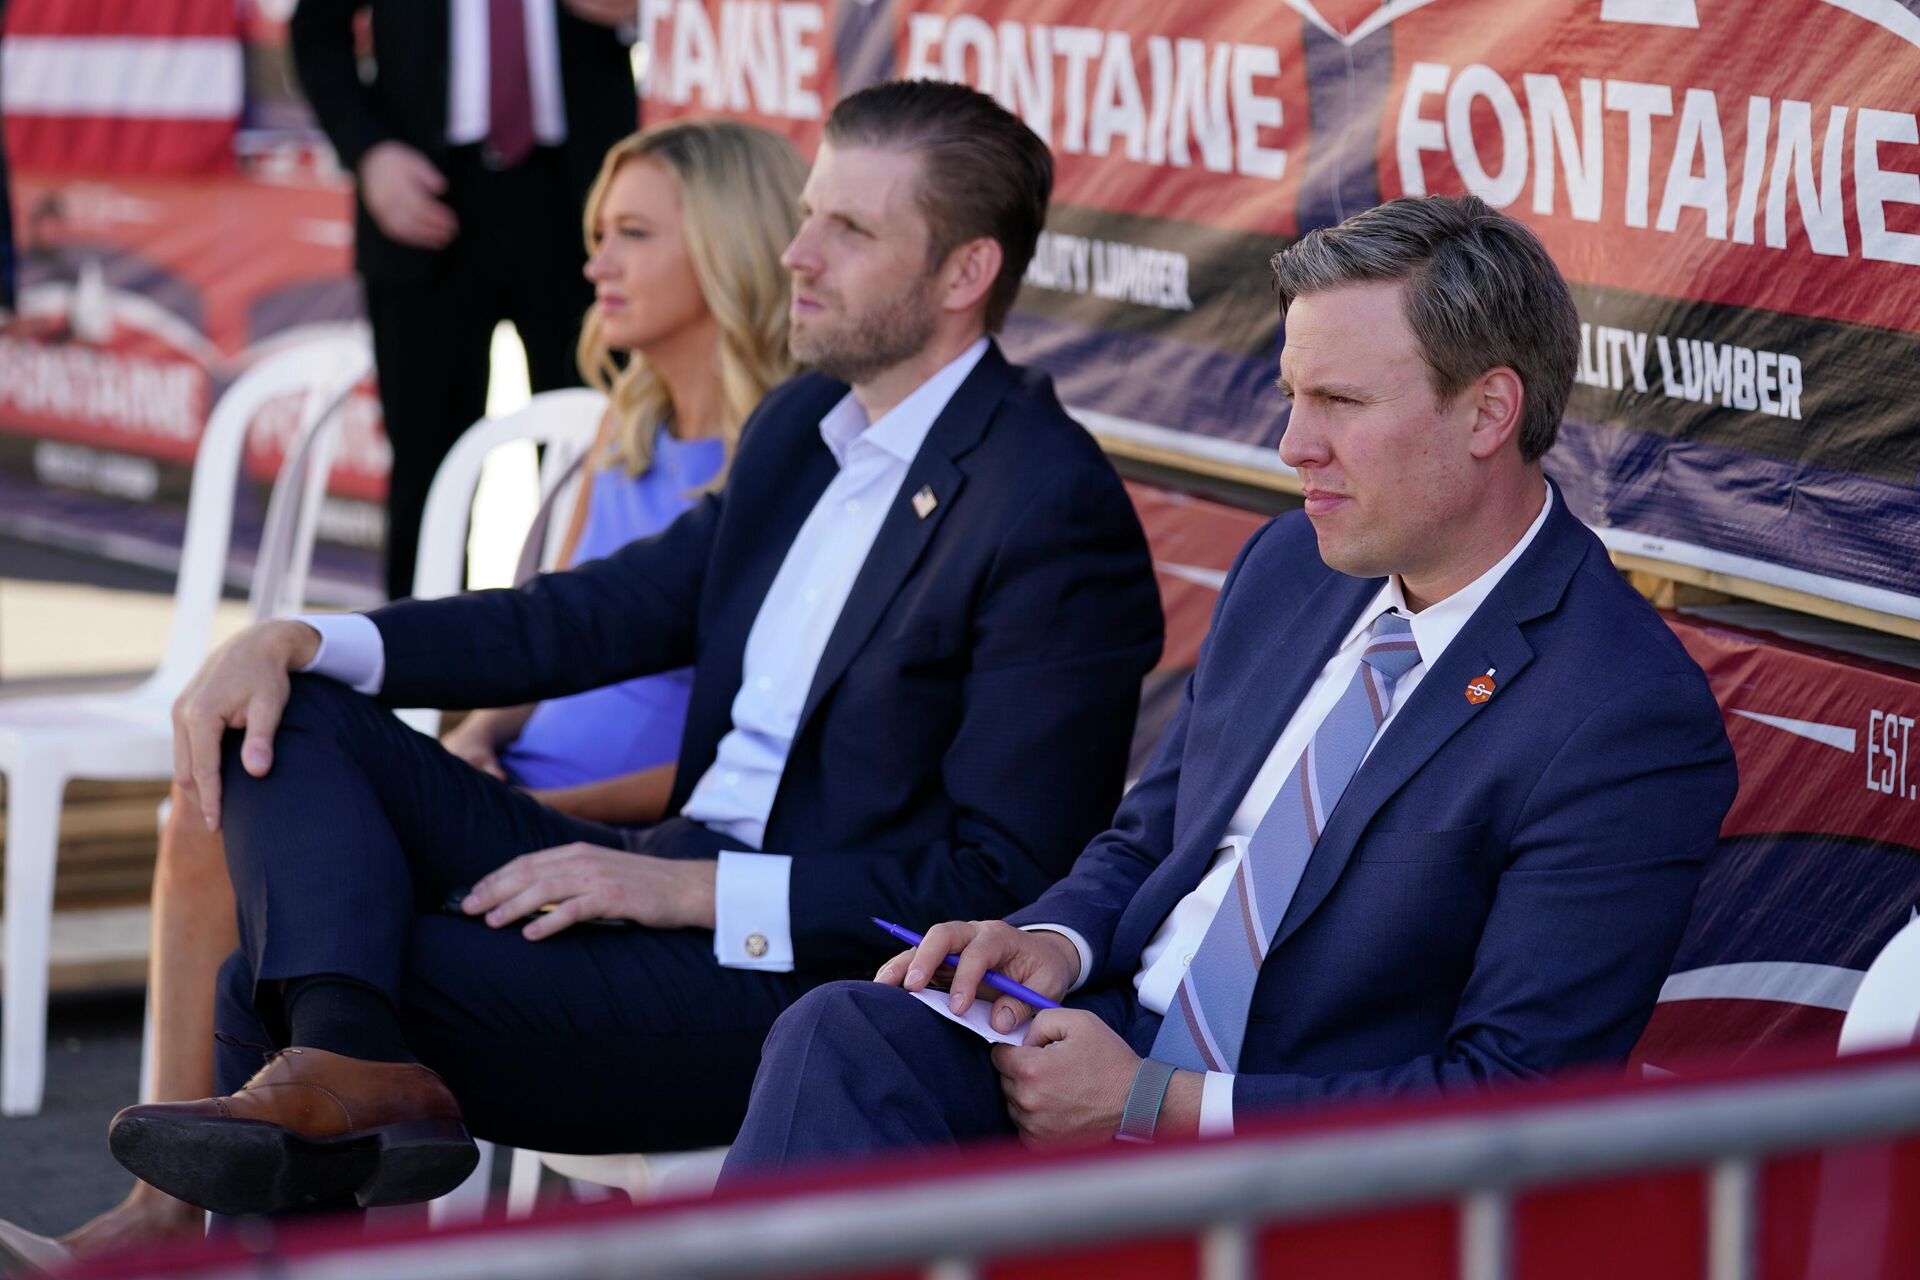 From left, White House press secretary Kayleigh McEnany, Eric Trump, son of President Donald Trump, and campaign manager for Donald Trump's 2020 presidential campaign Bill Stepien, listen as President Donald Trump speaks to a crowd of supporters during a campaign stop at Mariotti Building Product, Thursday, Aug. 20, 2020, in Old Forge, Pa. - Sputnik International, 1920, 13.06.2022